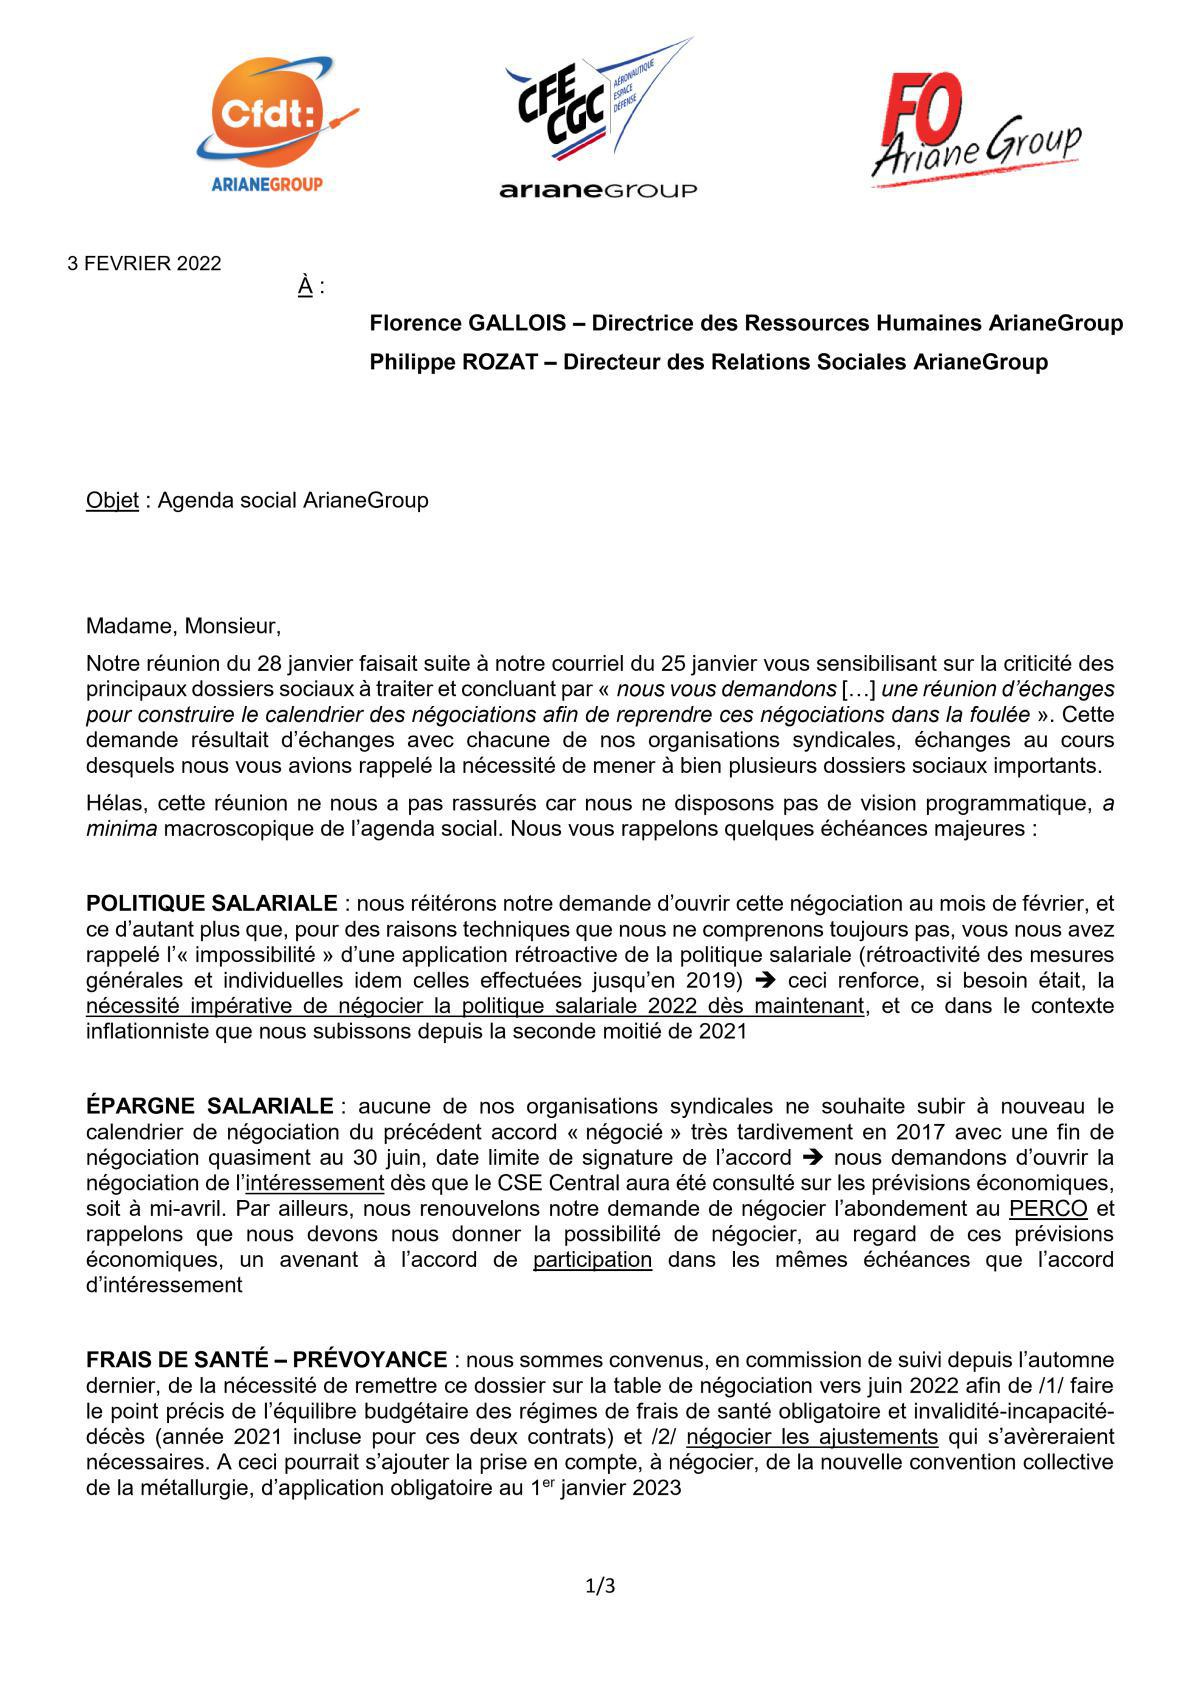 Courrier Intersyndical, CFDT / CFE-CGC / FO, concernant l'agenda social d'AGS